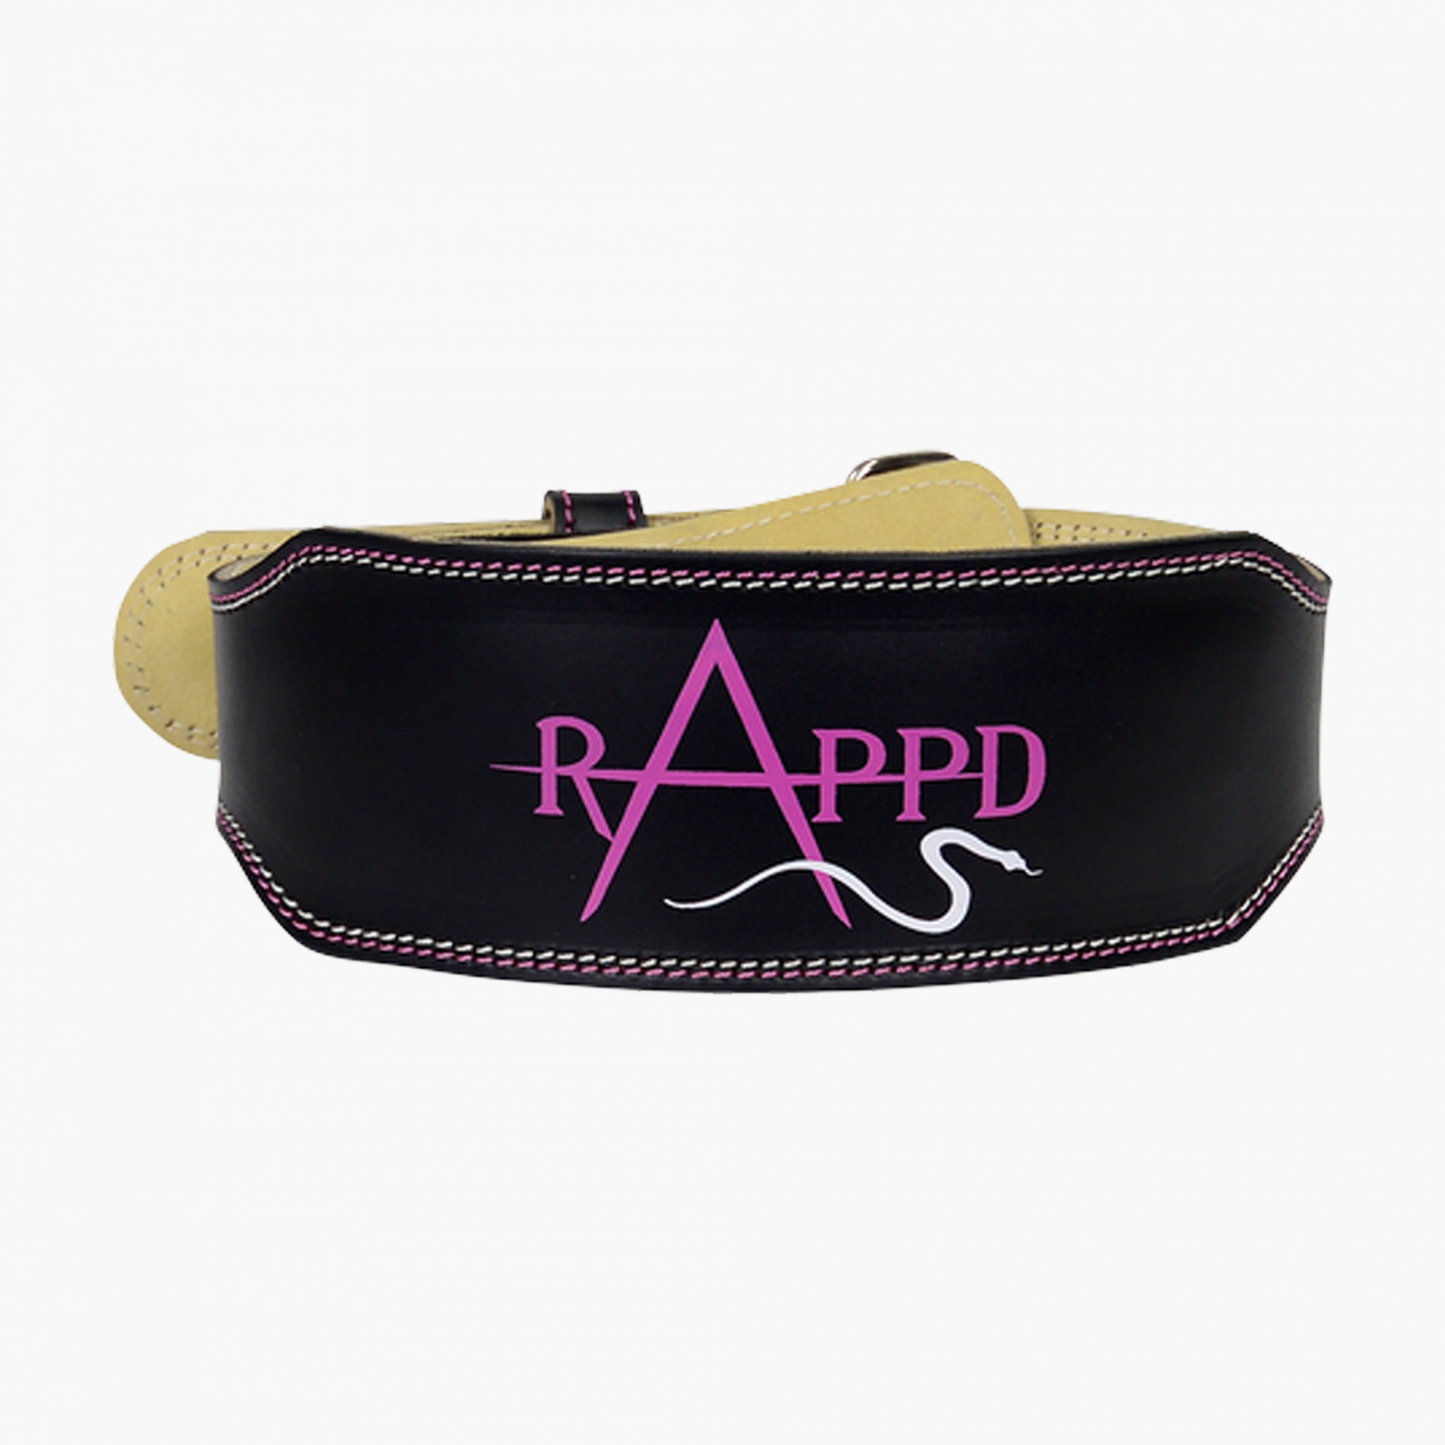 Rappd 4 Inch leather Belt S-XL